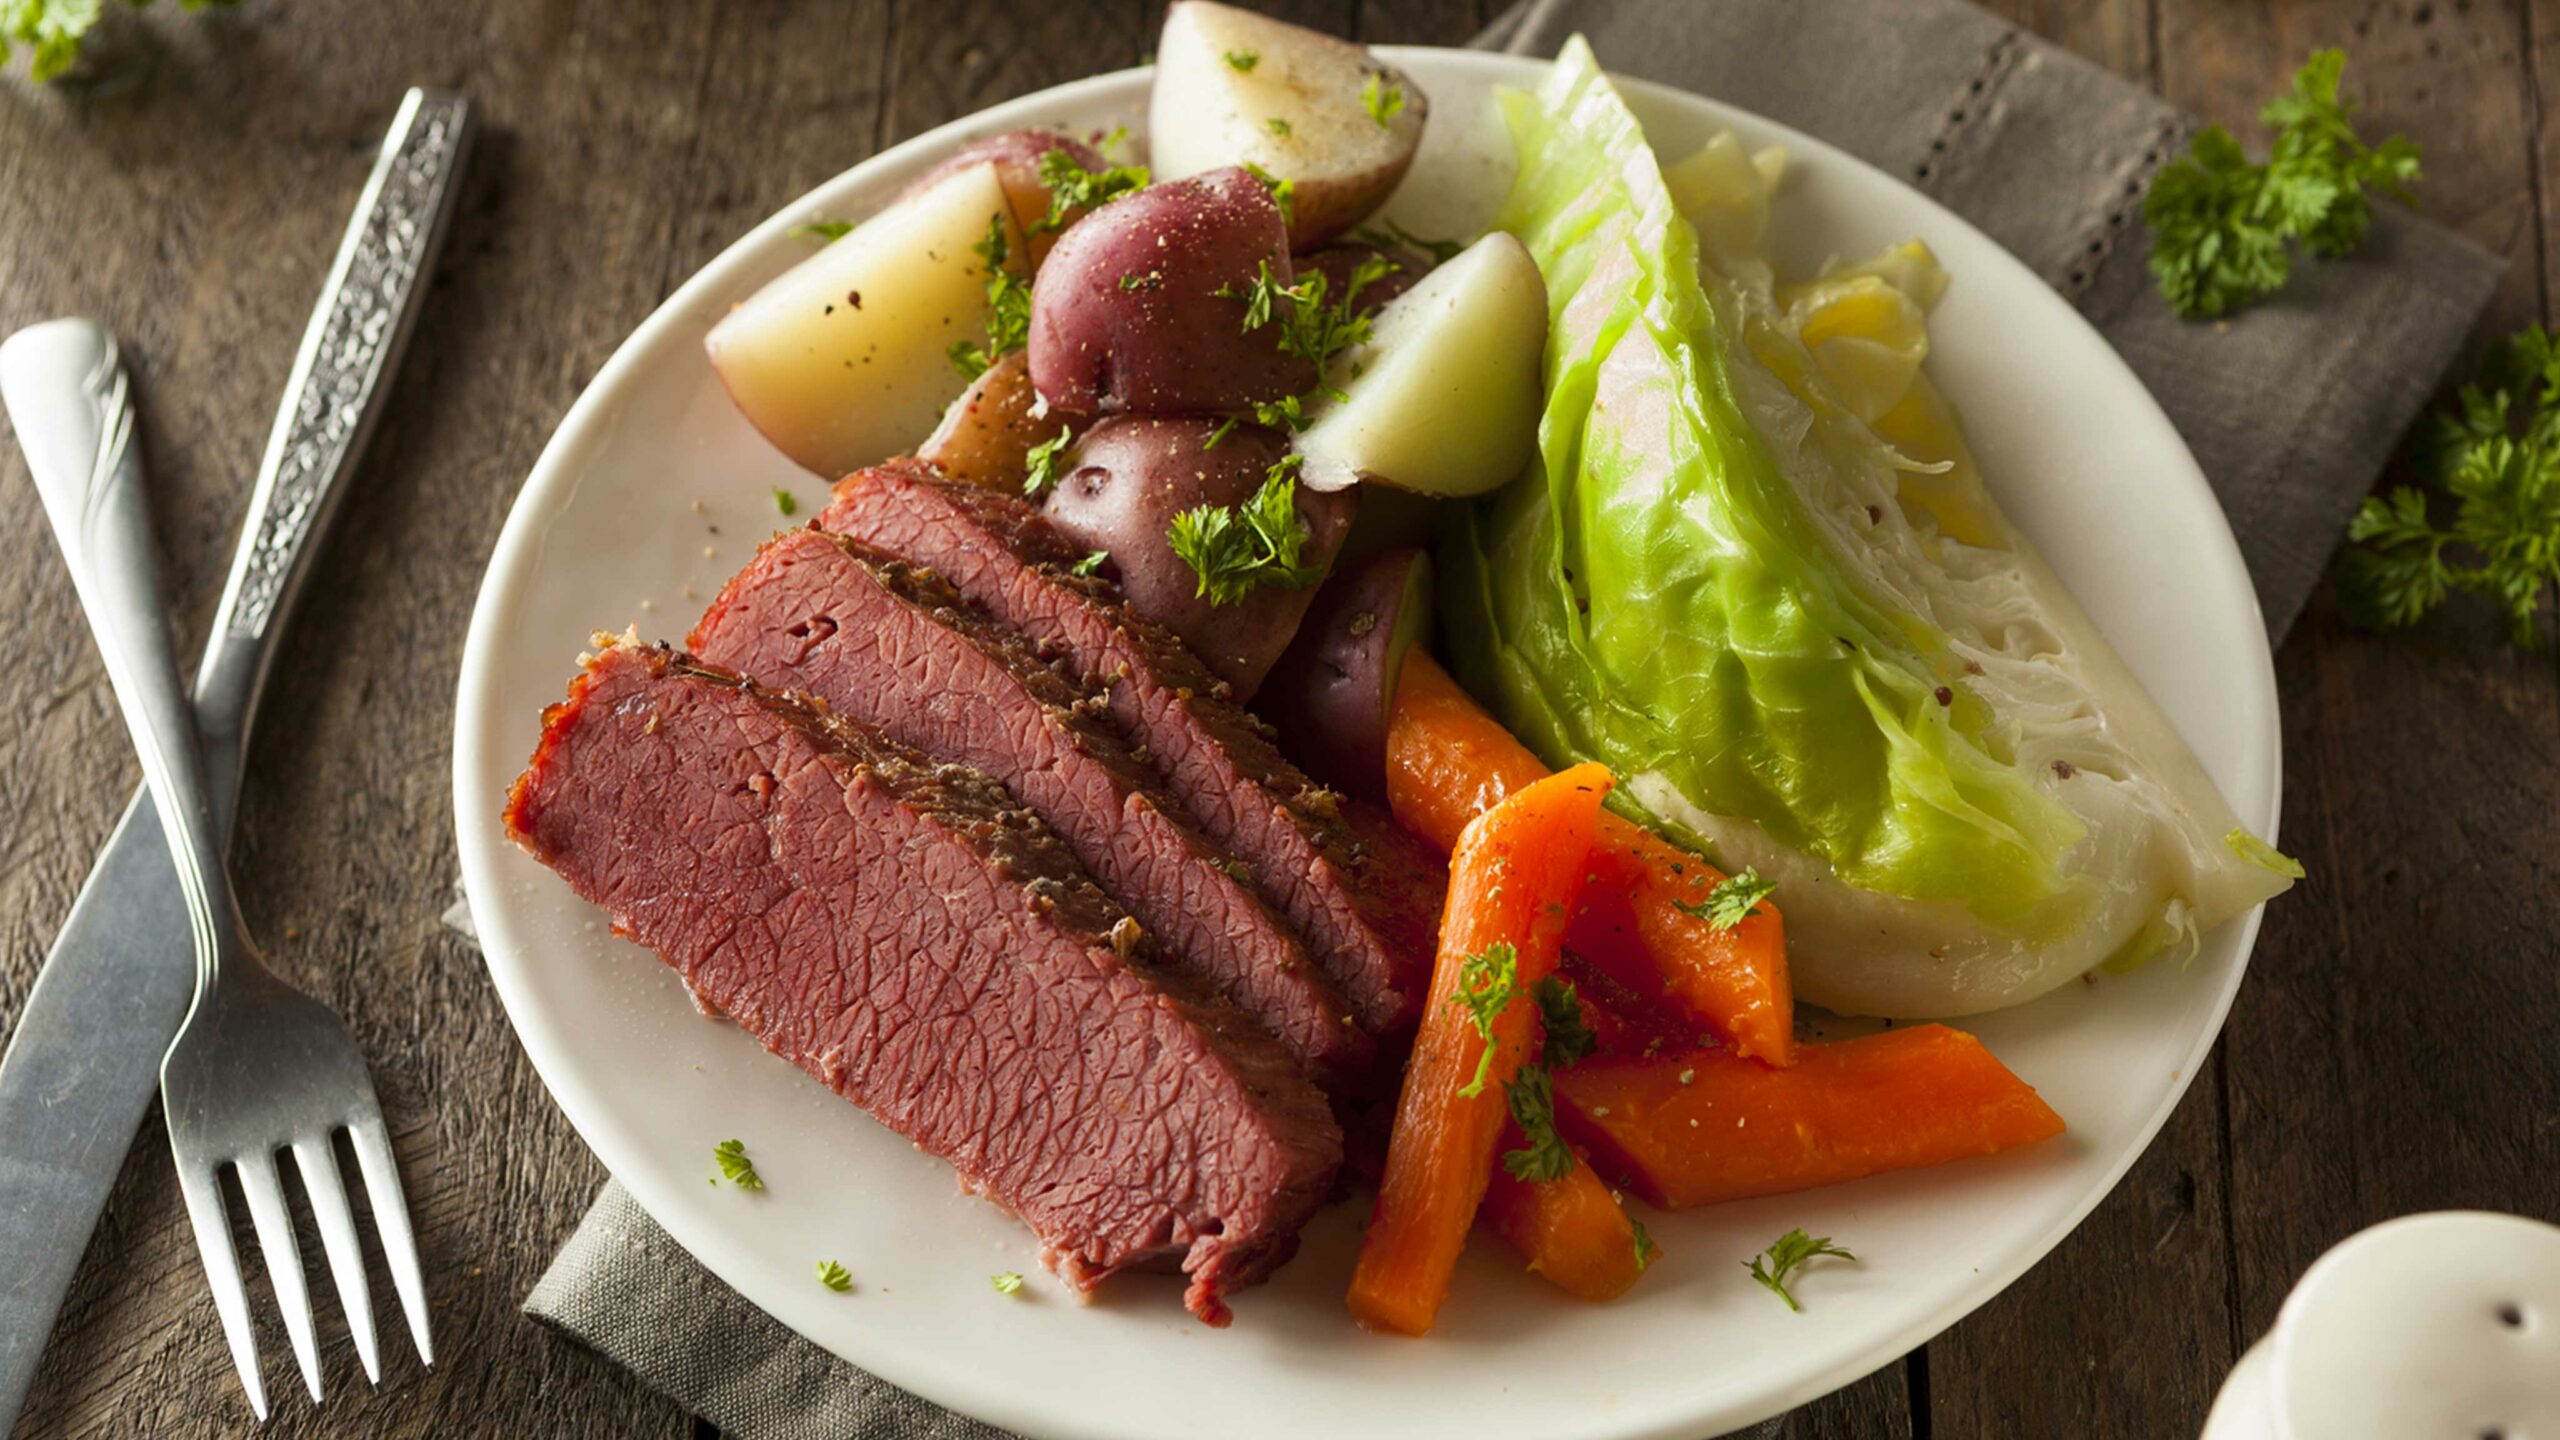 Today, we’re bringing you the origin of the popular seasonal dish created by Irish immigrants: corned beef and cabbage. Millions of immigrants had escaped the great famine in the late 19th century by fleeing to the Americas with little to no money. Being frugal with their income, they deviated from their pork and potato diet to beef and (essentially a filler) cabbage. If you have come to love this sensible dish, here are five spots that can feed your craving on National Corned Beef and Cabbage Day on March 17th. 